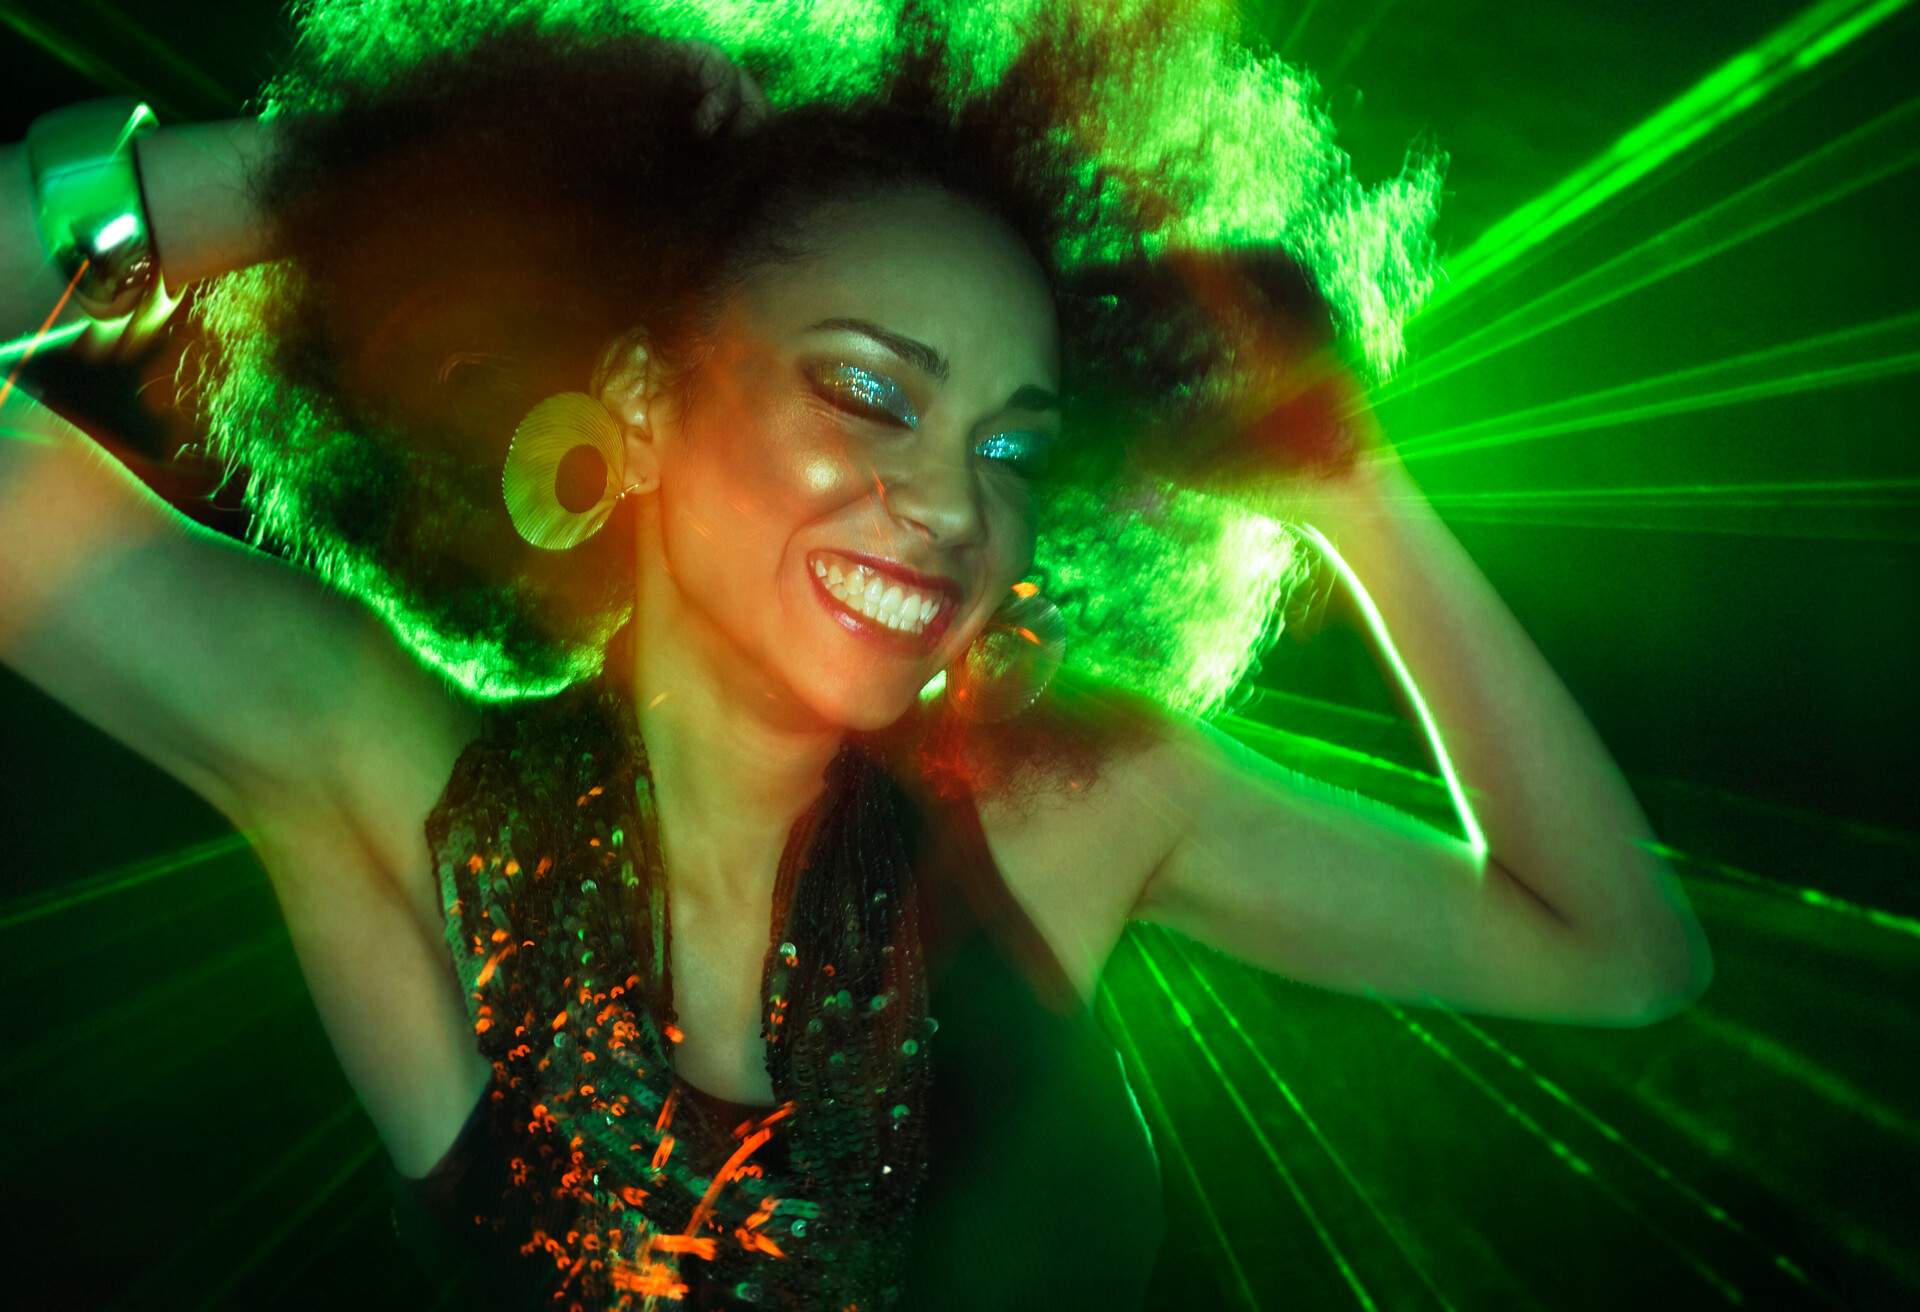 A person dances with their eyes closed, lost in the rhythm and movement as they sway and groove against a backdrop of bright and vibrant lights.